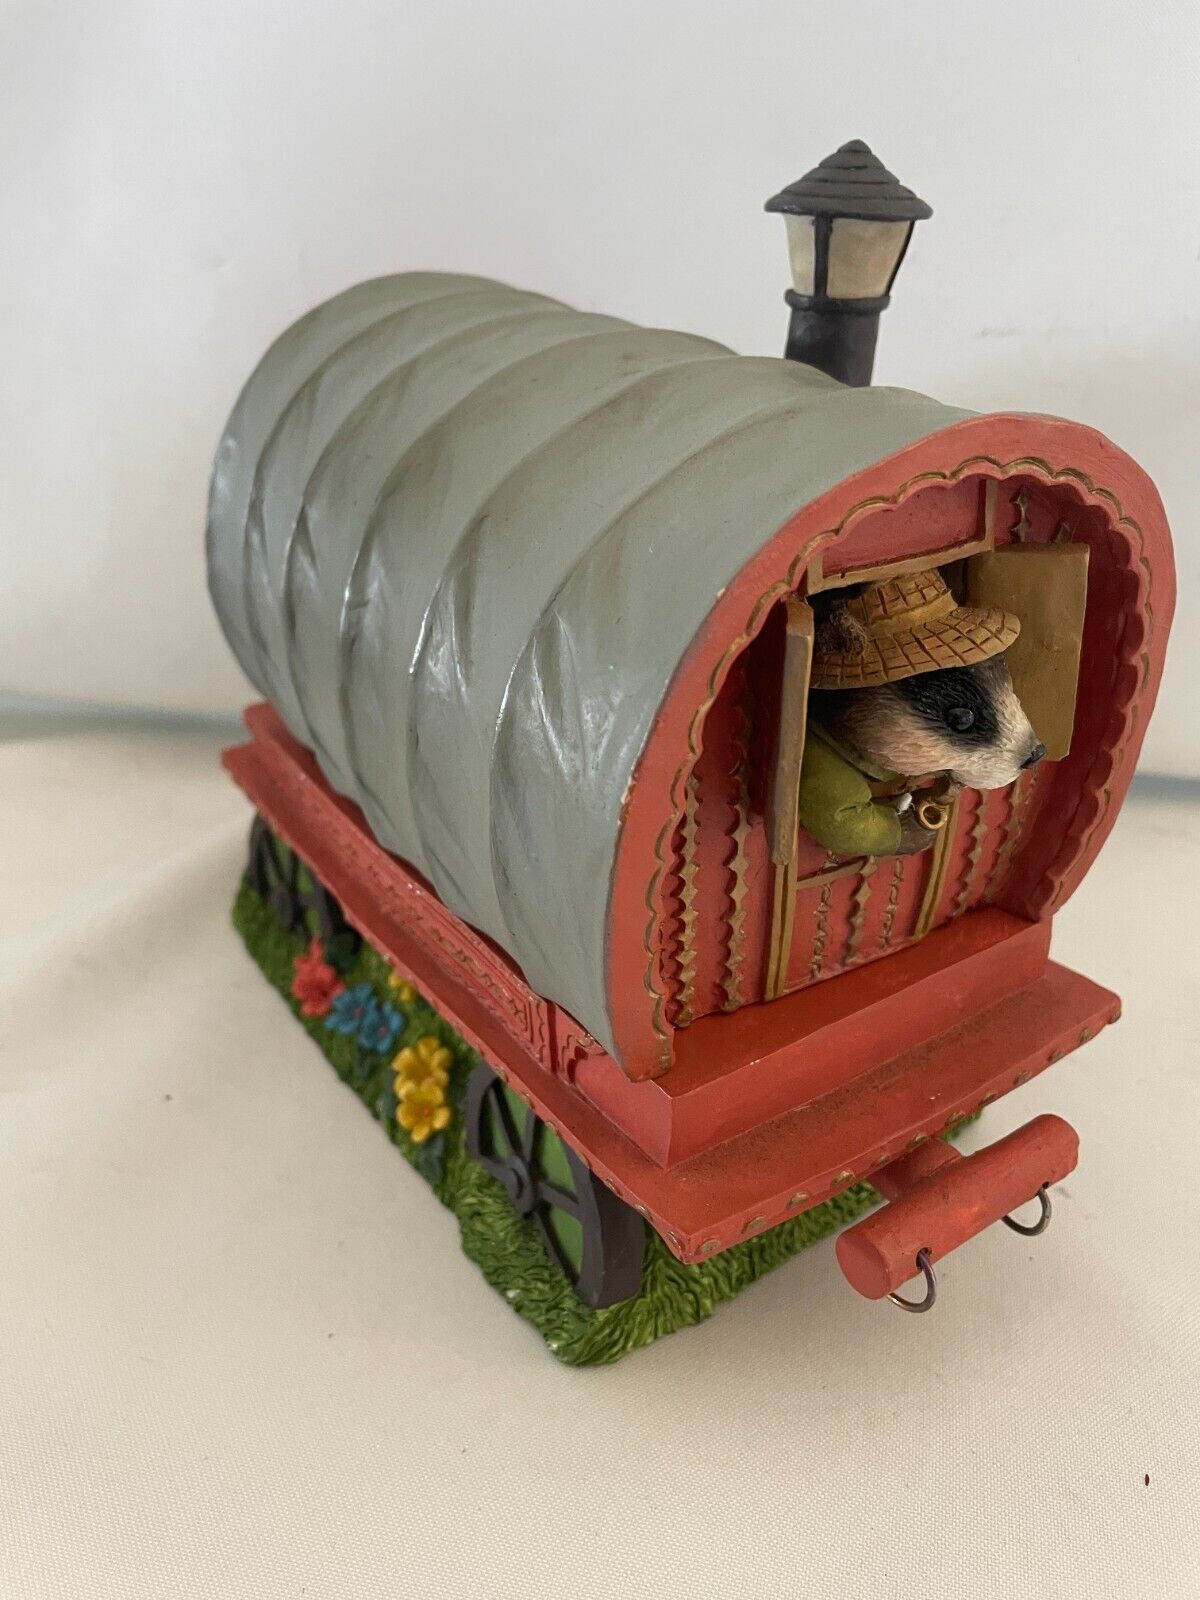 Gypsy Caravan Music Box From Conversation Concepts. Plays King of the Road.